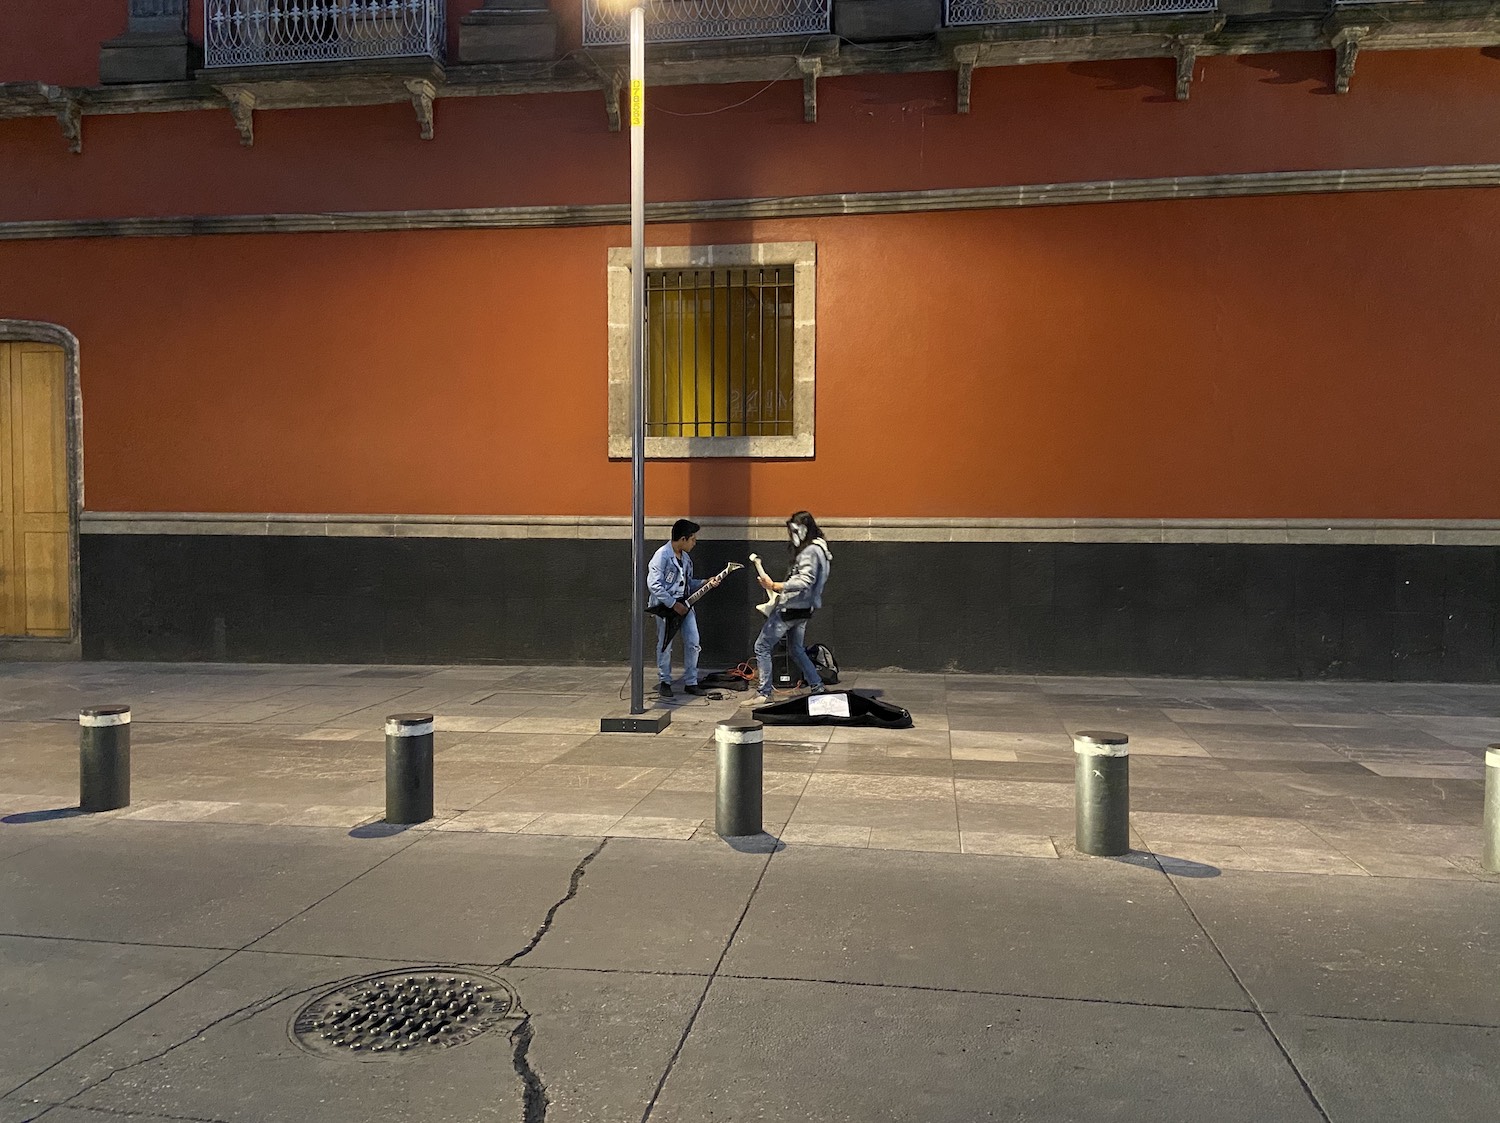 Young street musicians in Mexico City.